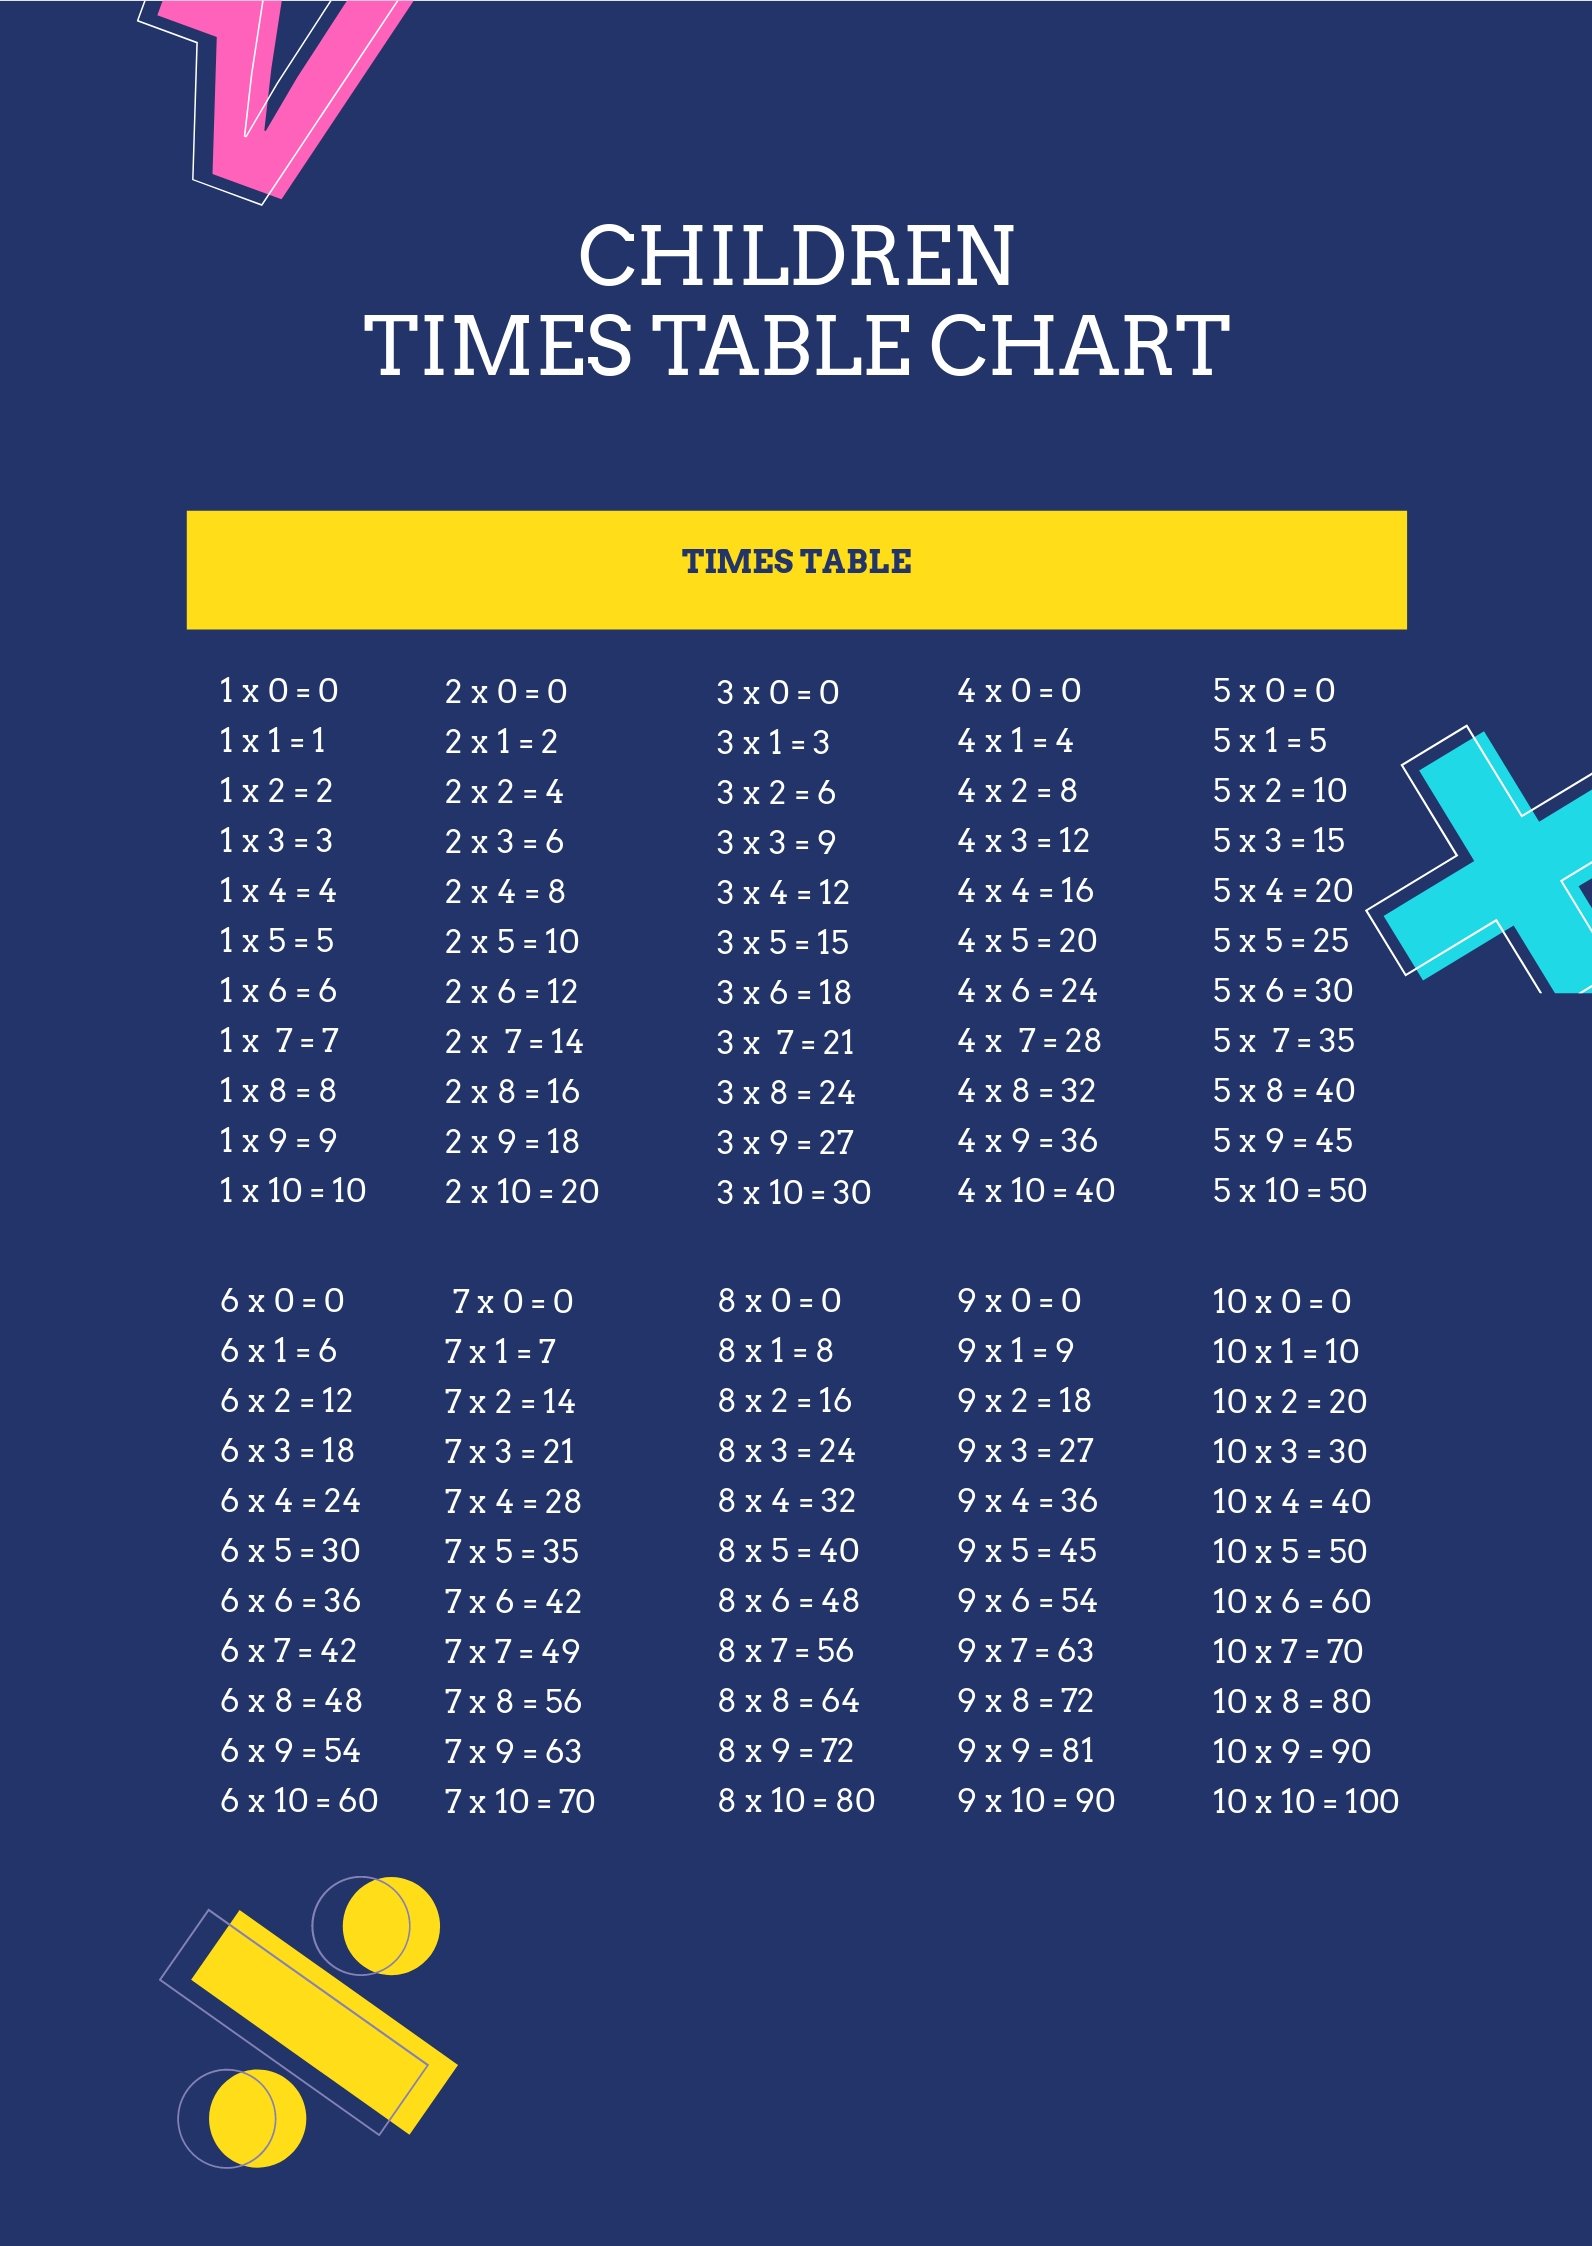 Children Times Tables Chart Template in PDF